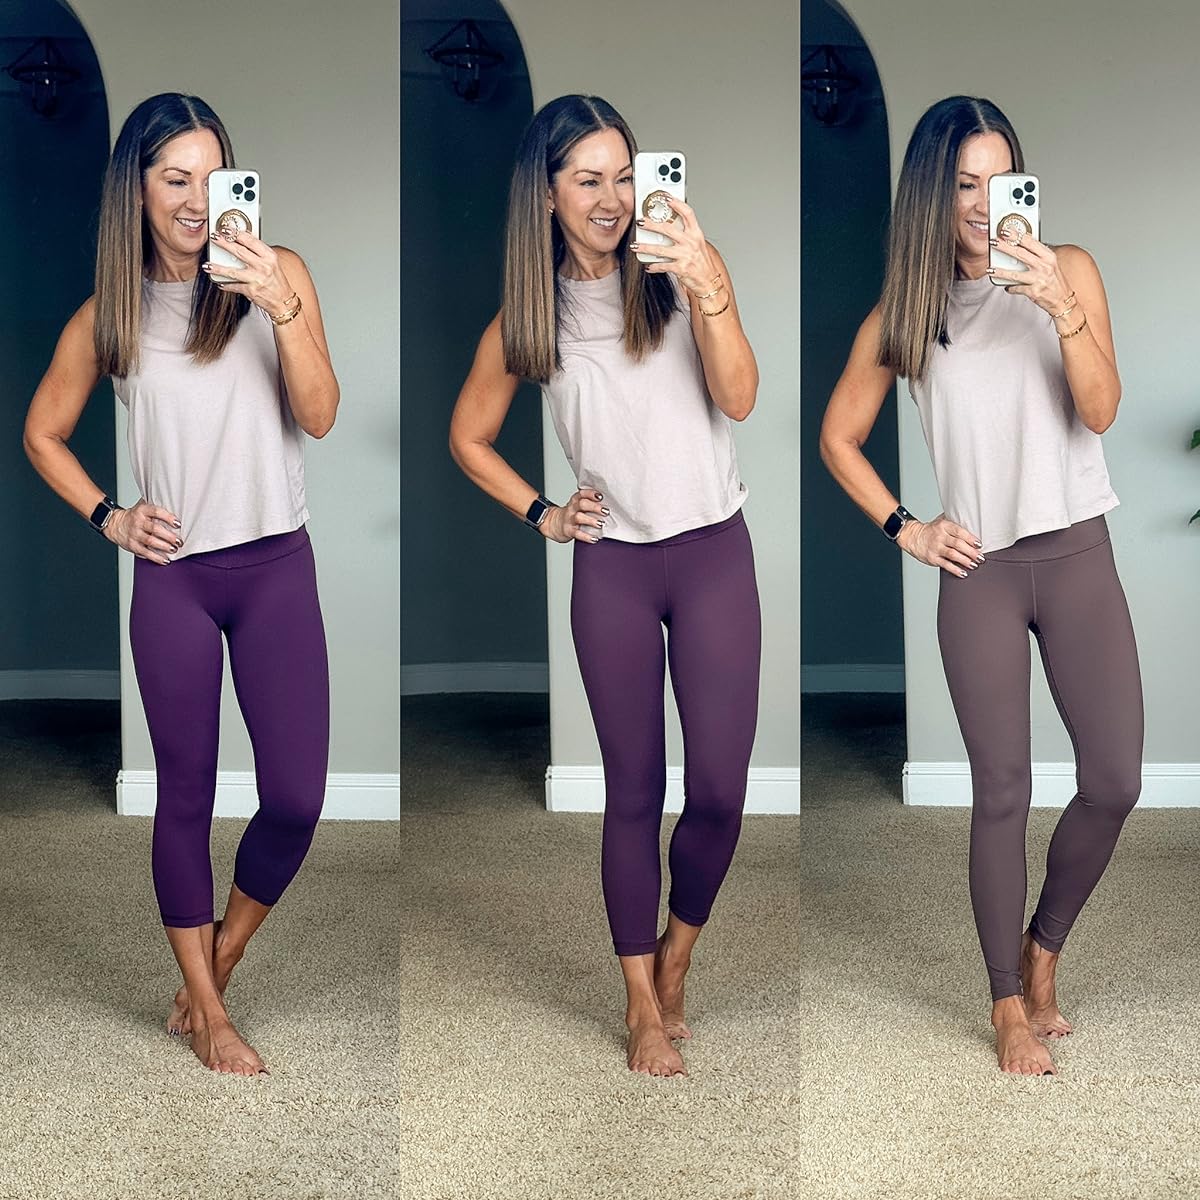 January Top 10 Hottest Best Sellers | January, top 10, best sellers, monthly best sellers, Amazon, workout, fitness, tank top, leggings, butterluxe leggings, fitness, athleisure